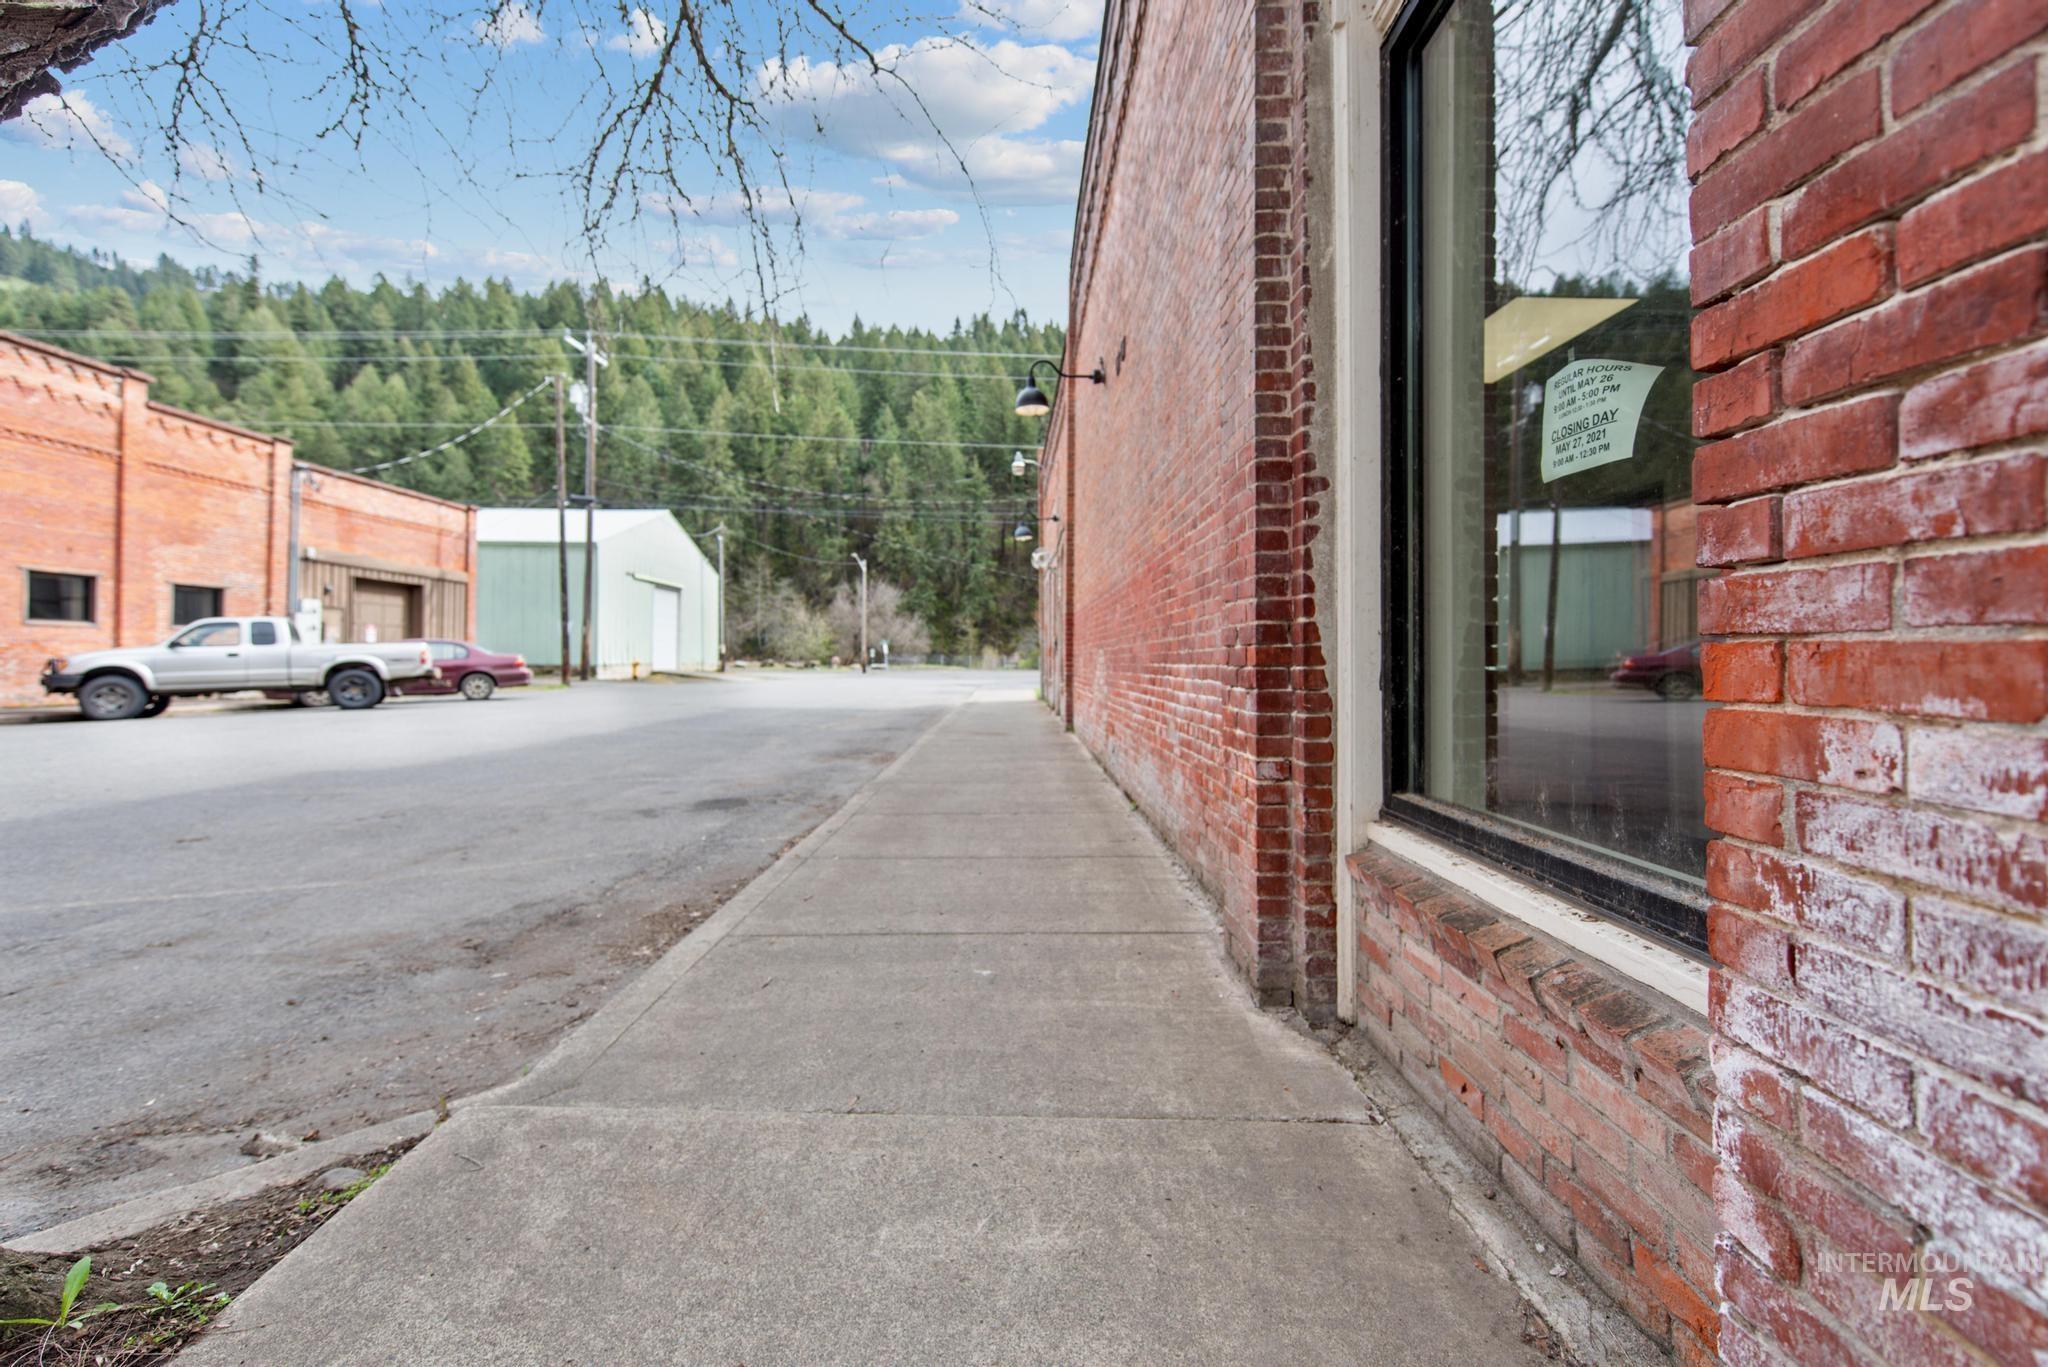 509 E Main St., Kendrick, Idaho 83537, Business/Commercial For Sale, Price $275,000,MLS 98907280